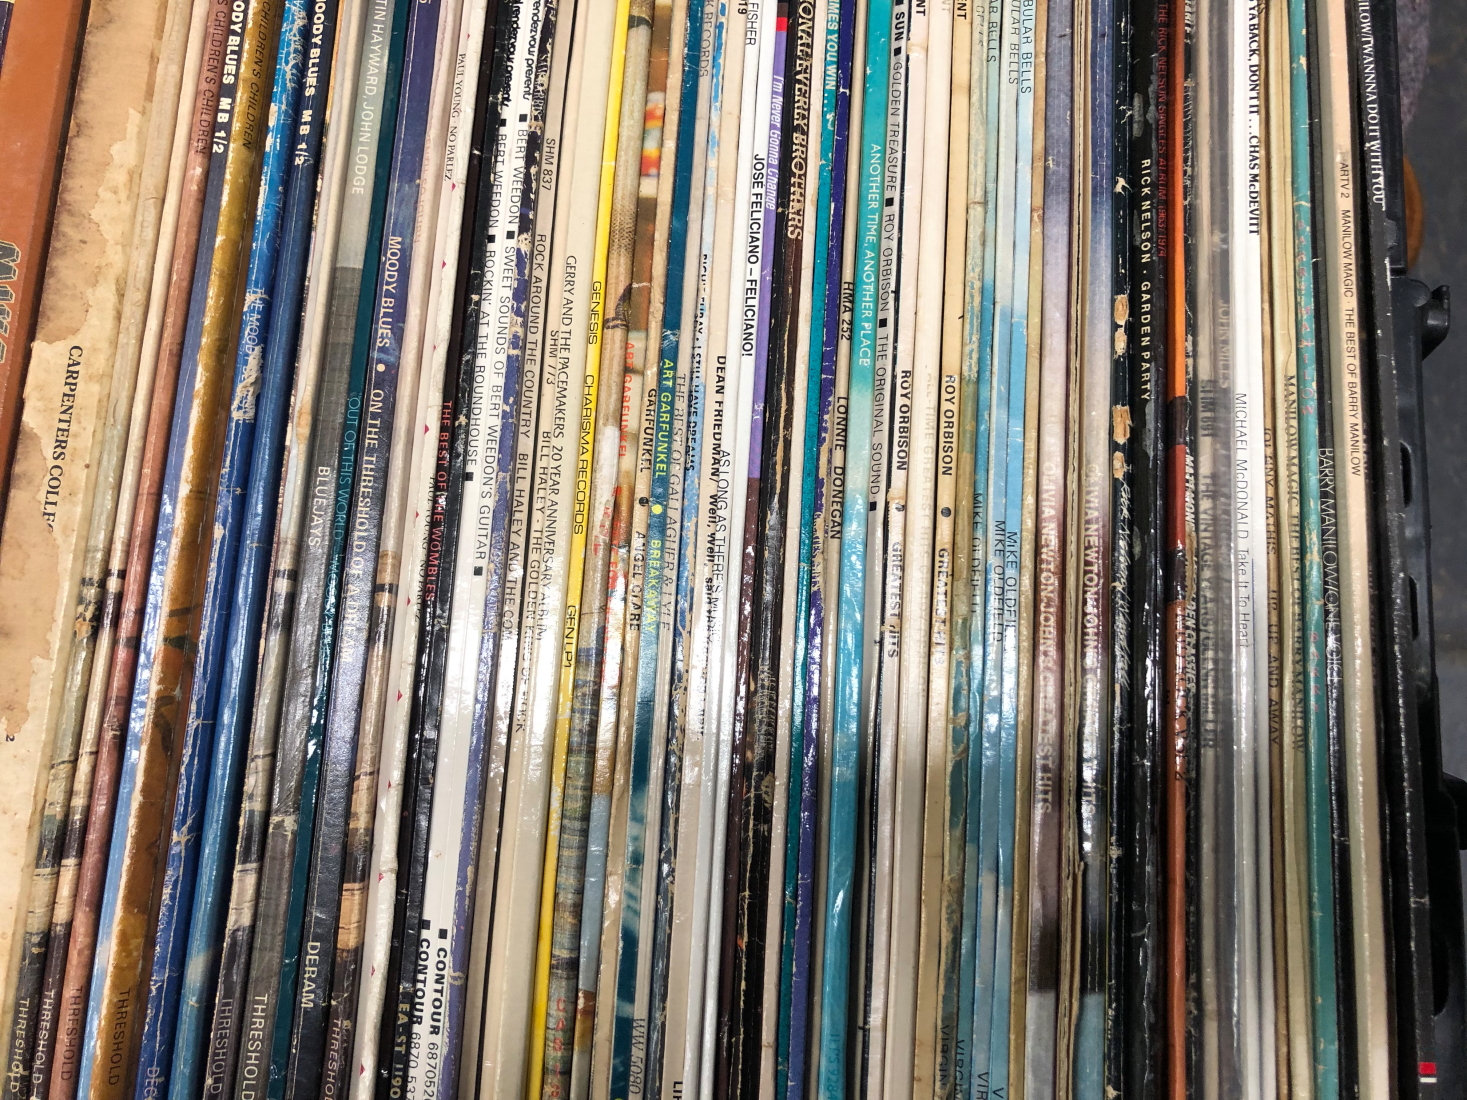 70+ ROCK AND POP LPs PLUS A SELCTIN OF LP BOX SETS - 1970s/1980s - Image 5 of 5